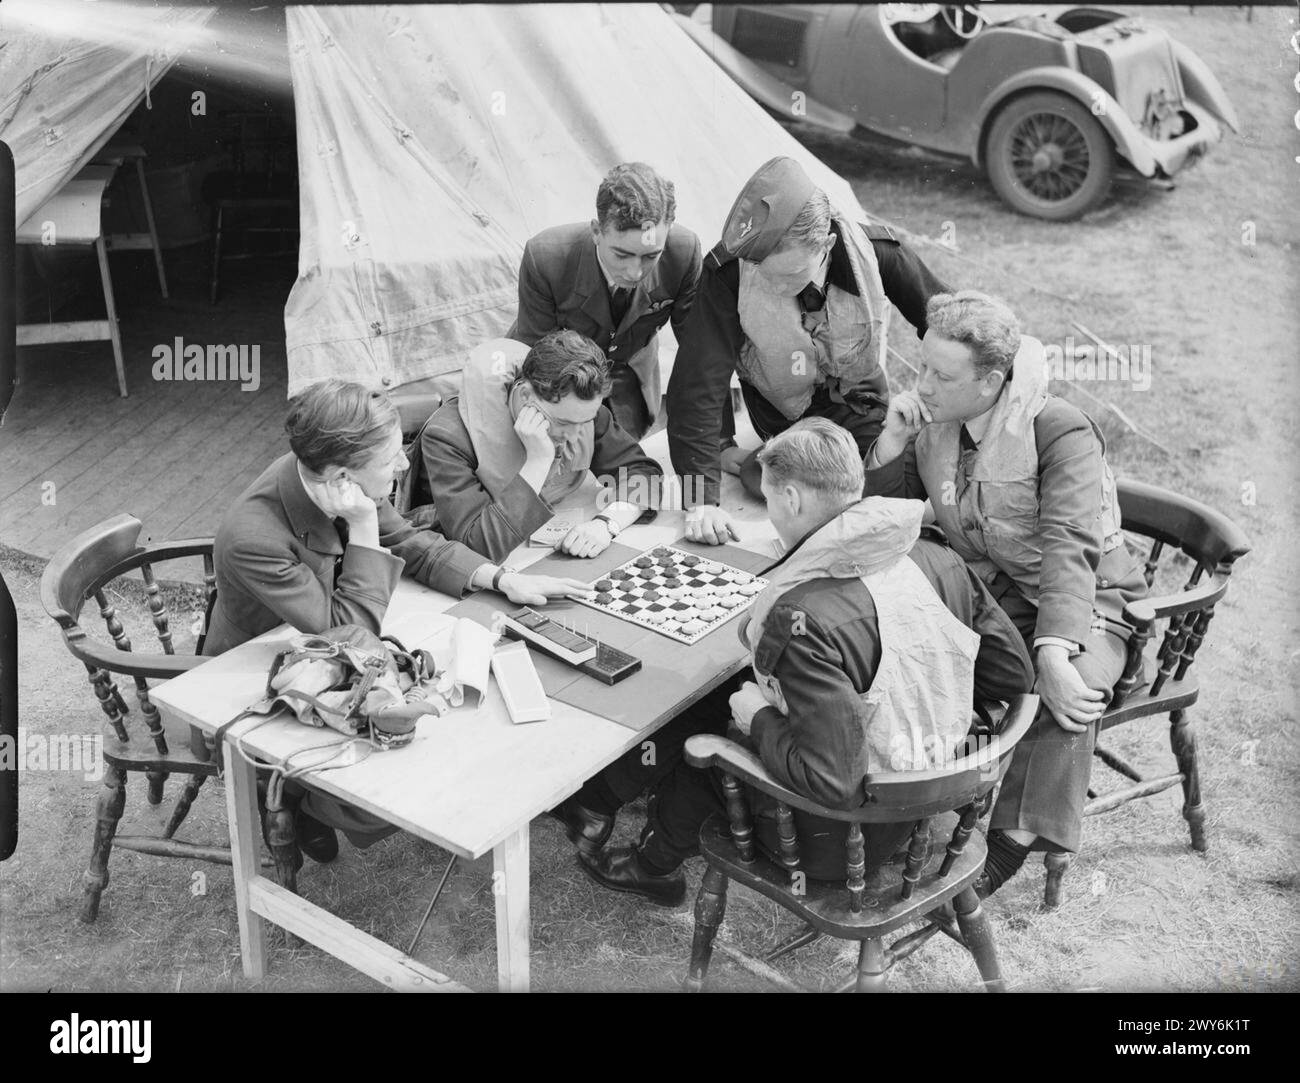 THE BATTLE OF BRITAIN 1940 - Boulton Paul Defiant pilots and gunners of No. 264 Squadron play a game of draughts while waiting at readiness outside their dispersal tent at Kirton in Lindsey, August 1940. , Royal Air Force, 264 Squadron Stock Photo